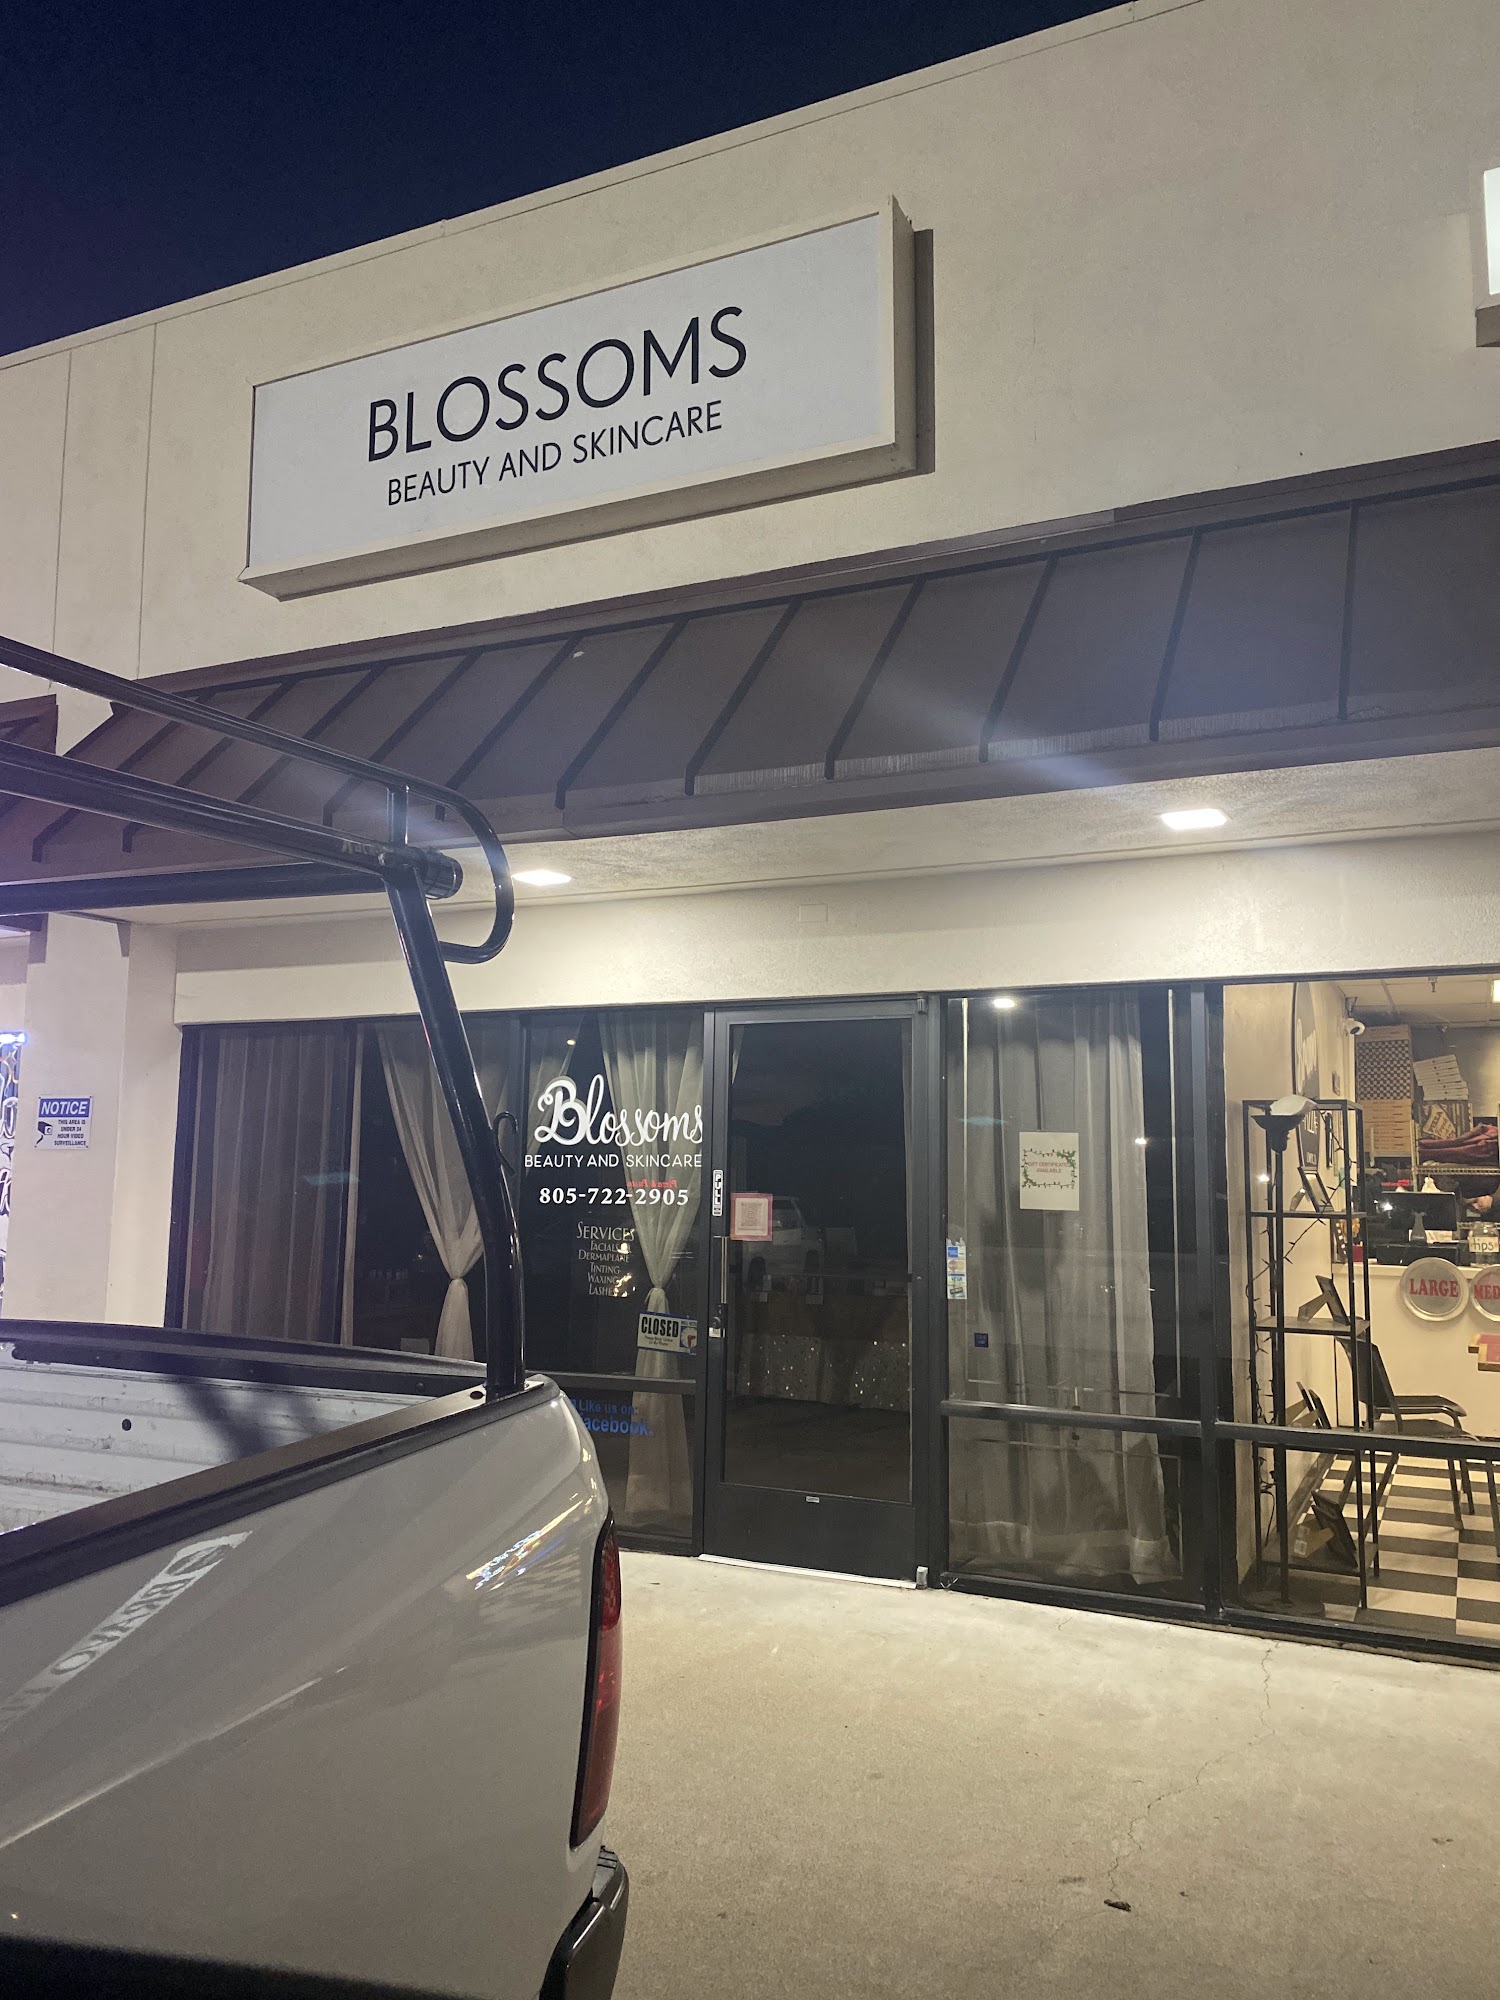 Blossoms Beauty and Skincare